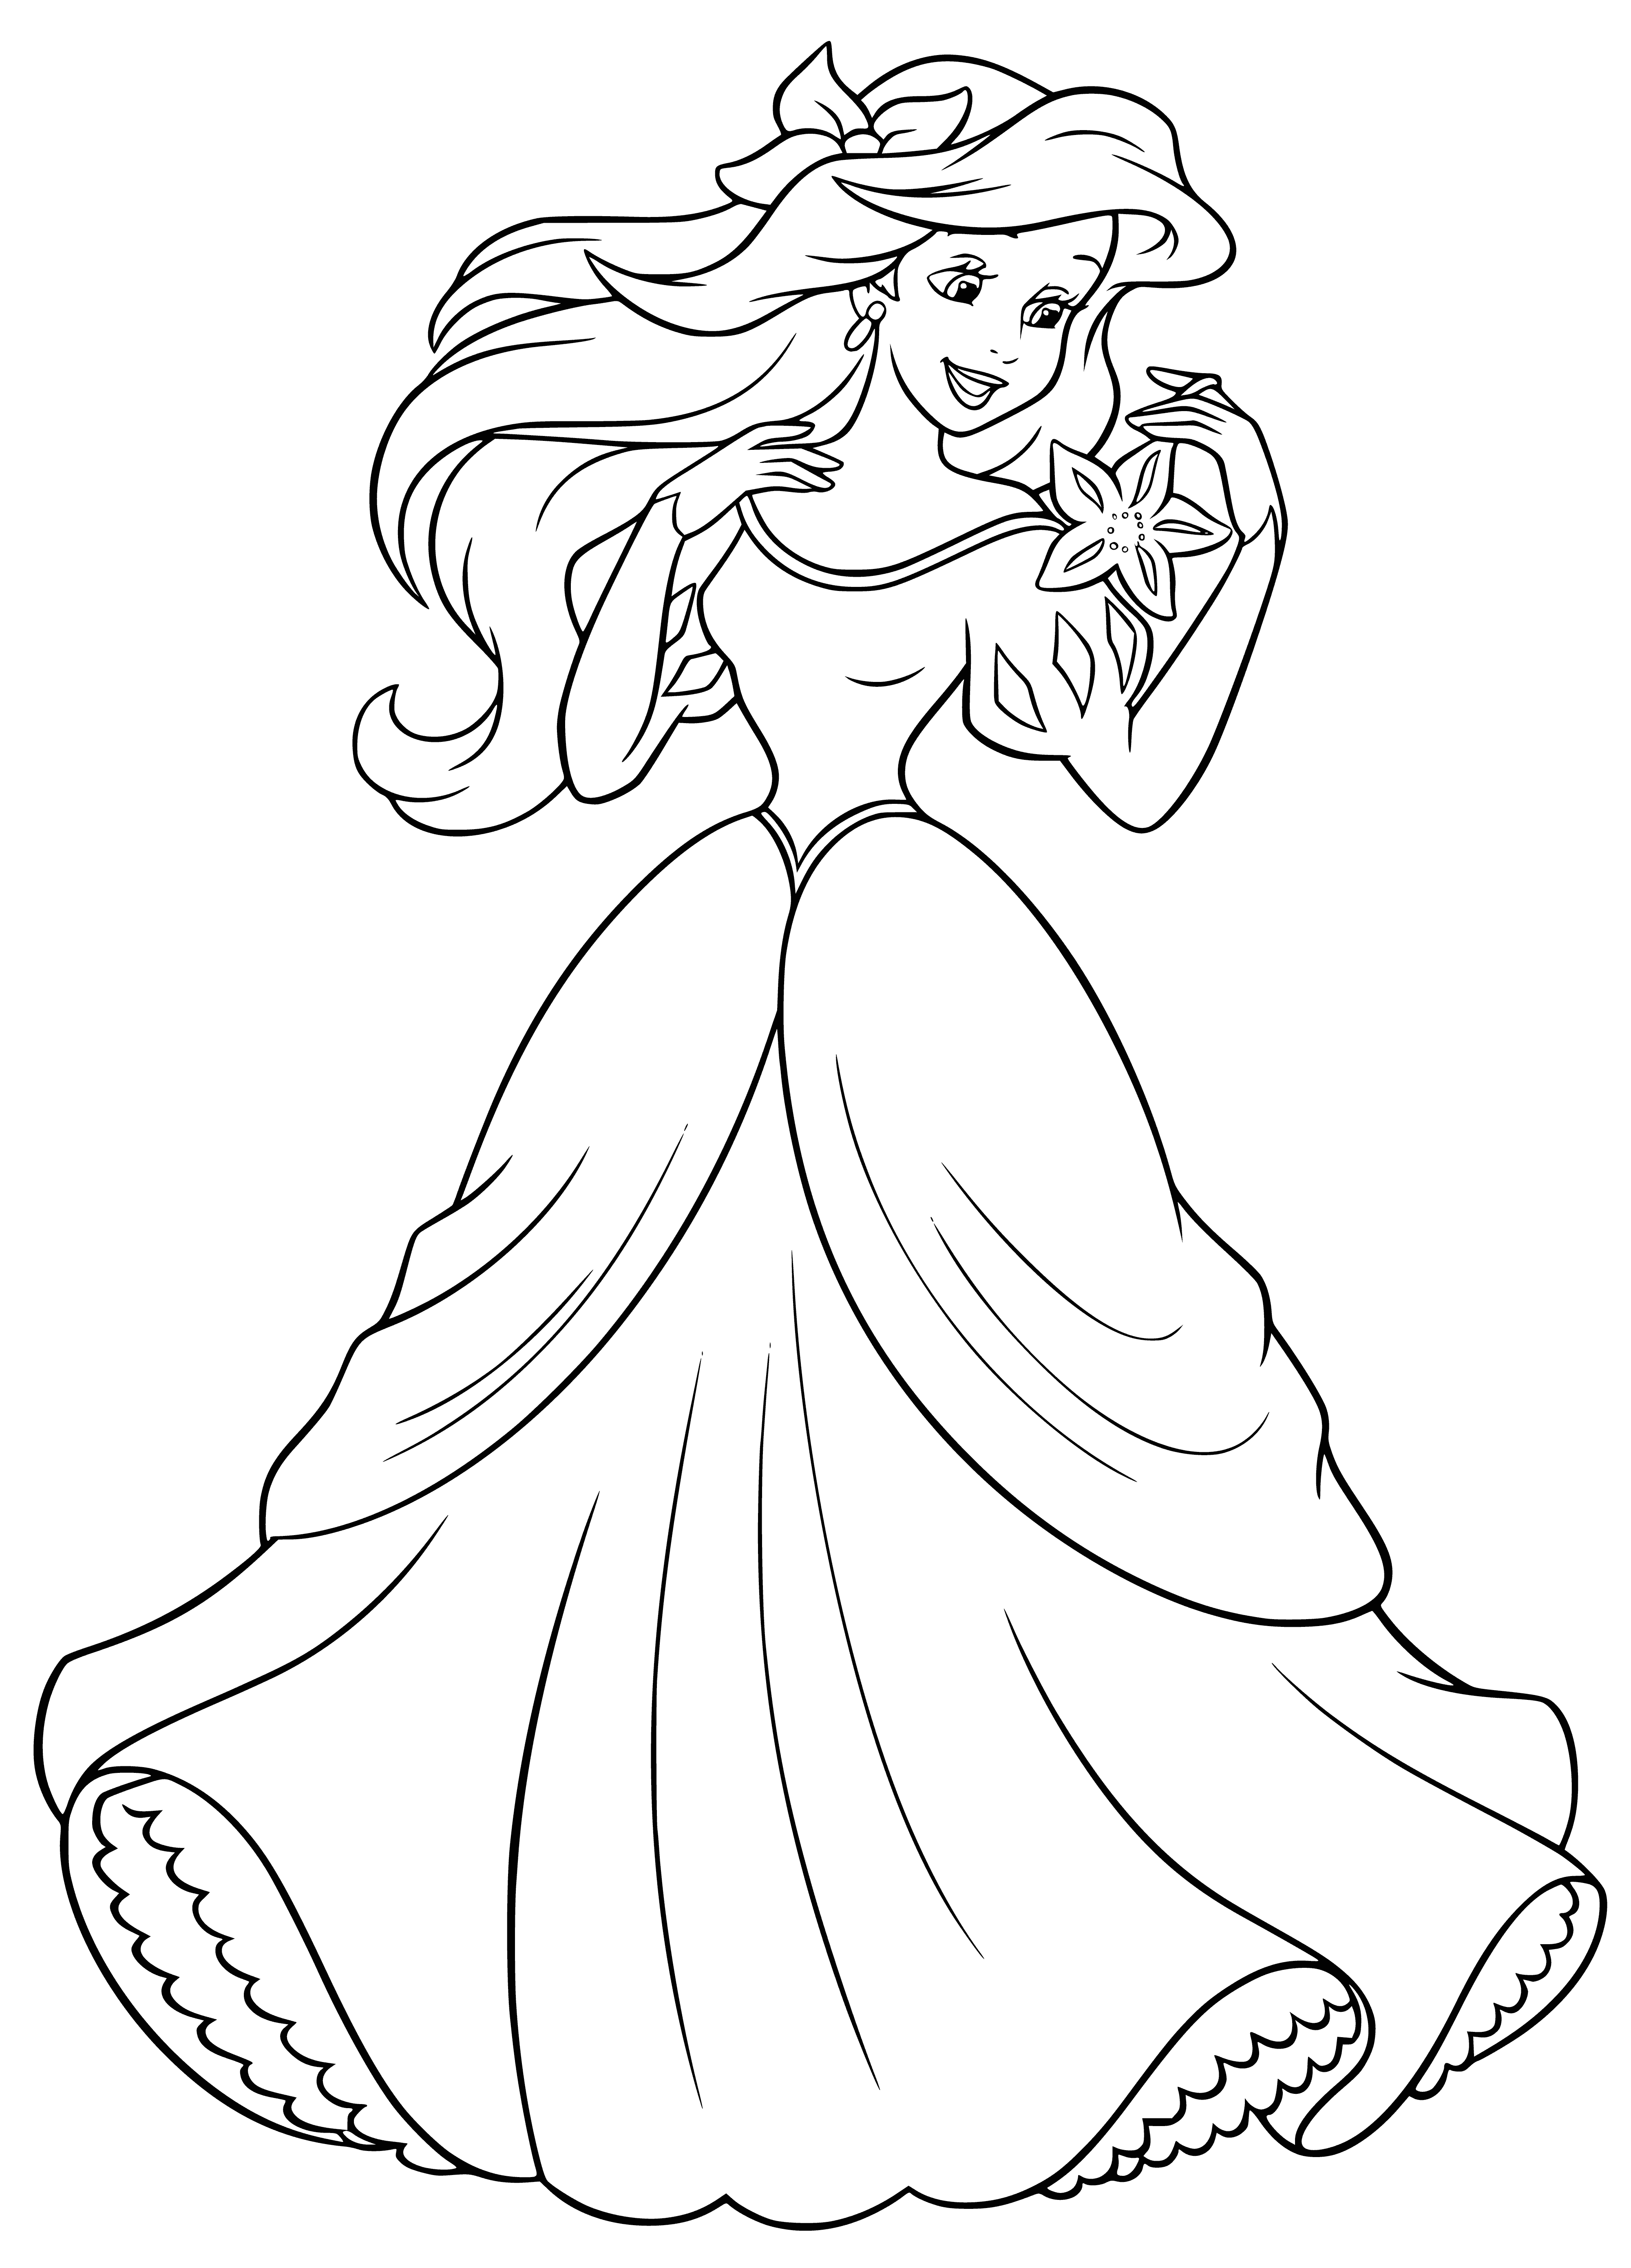 coloring page: Girl in shell-like dress stands with red hair, small waist, and joyful smile.